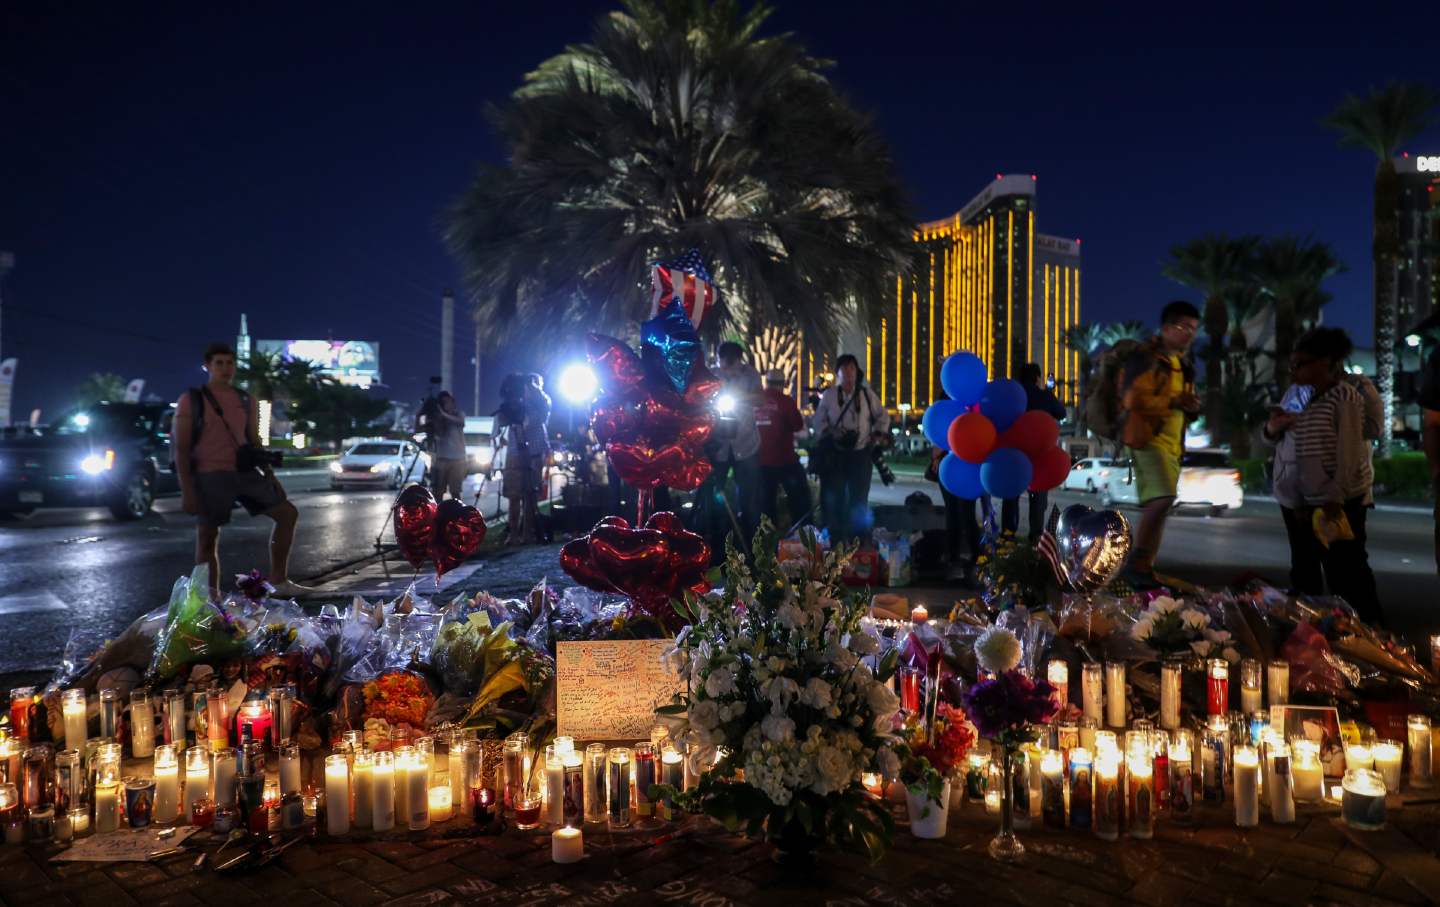 An emergency memorial for the victims of the Las Vegas mass shooting who died when a gunman opened fire on them in October 2017